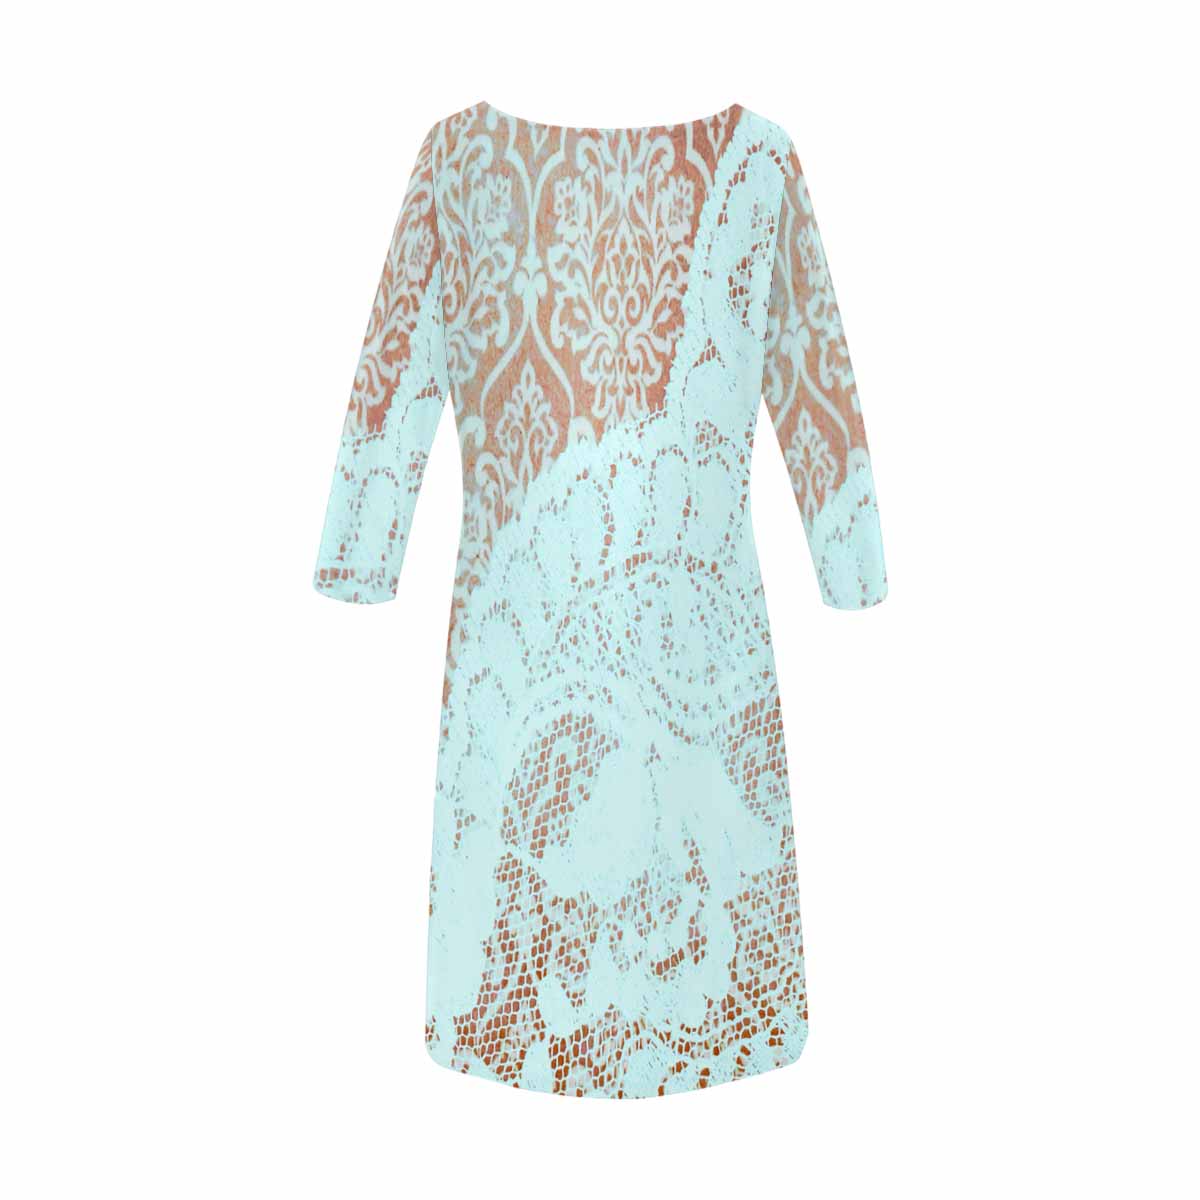 Victorian printed lace loose dress, Design 23